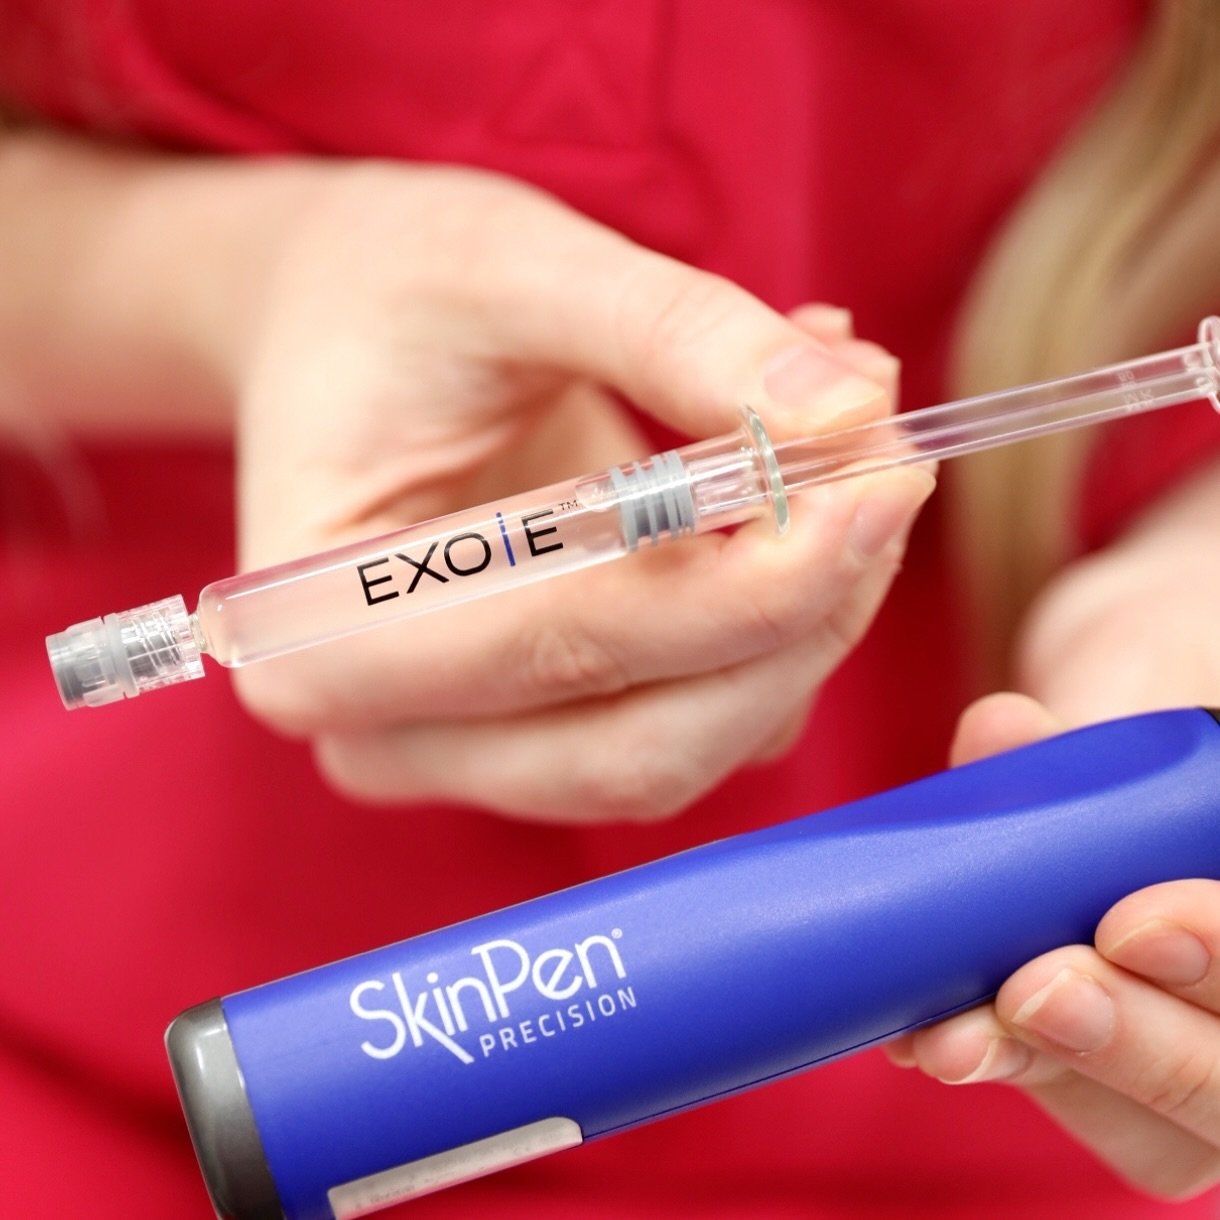 ✨SkinPen is one of our favorite microneedling treatments to improve tone and texture! 

Shrink pore size, improve acne scarring, and more with this treatment! We also love to add Exosomes to enhance results and speed up any downtime! 

Now when you g